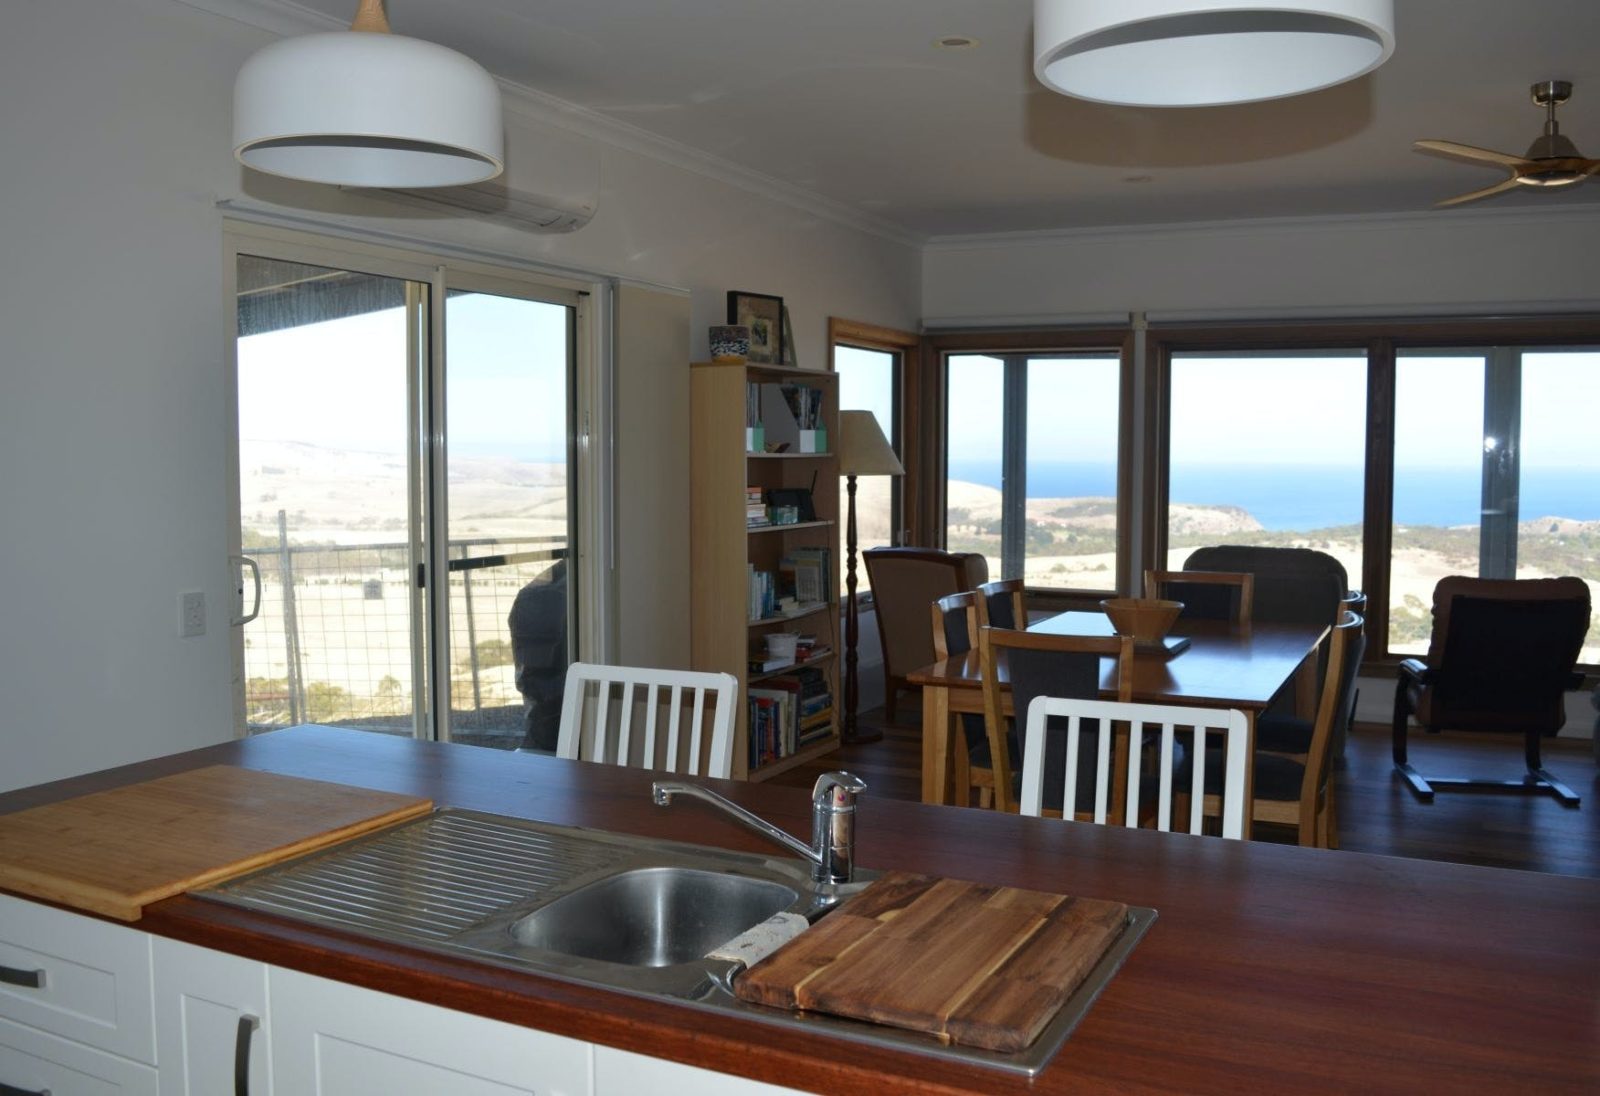 Kitchen, dining room, entrance and view to the sea